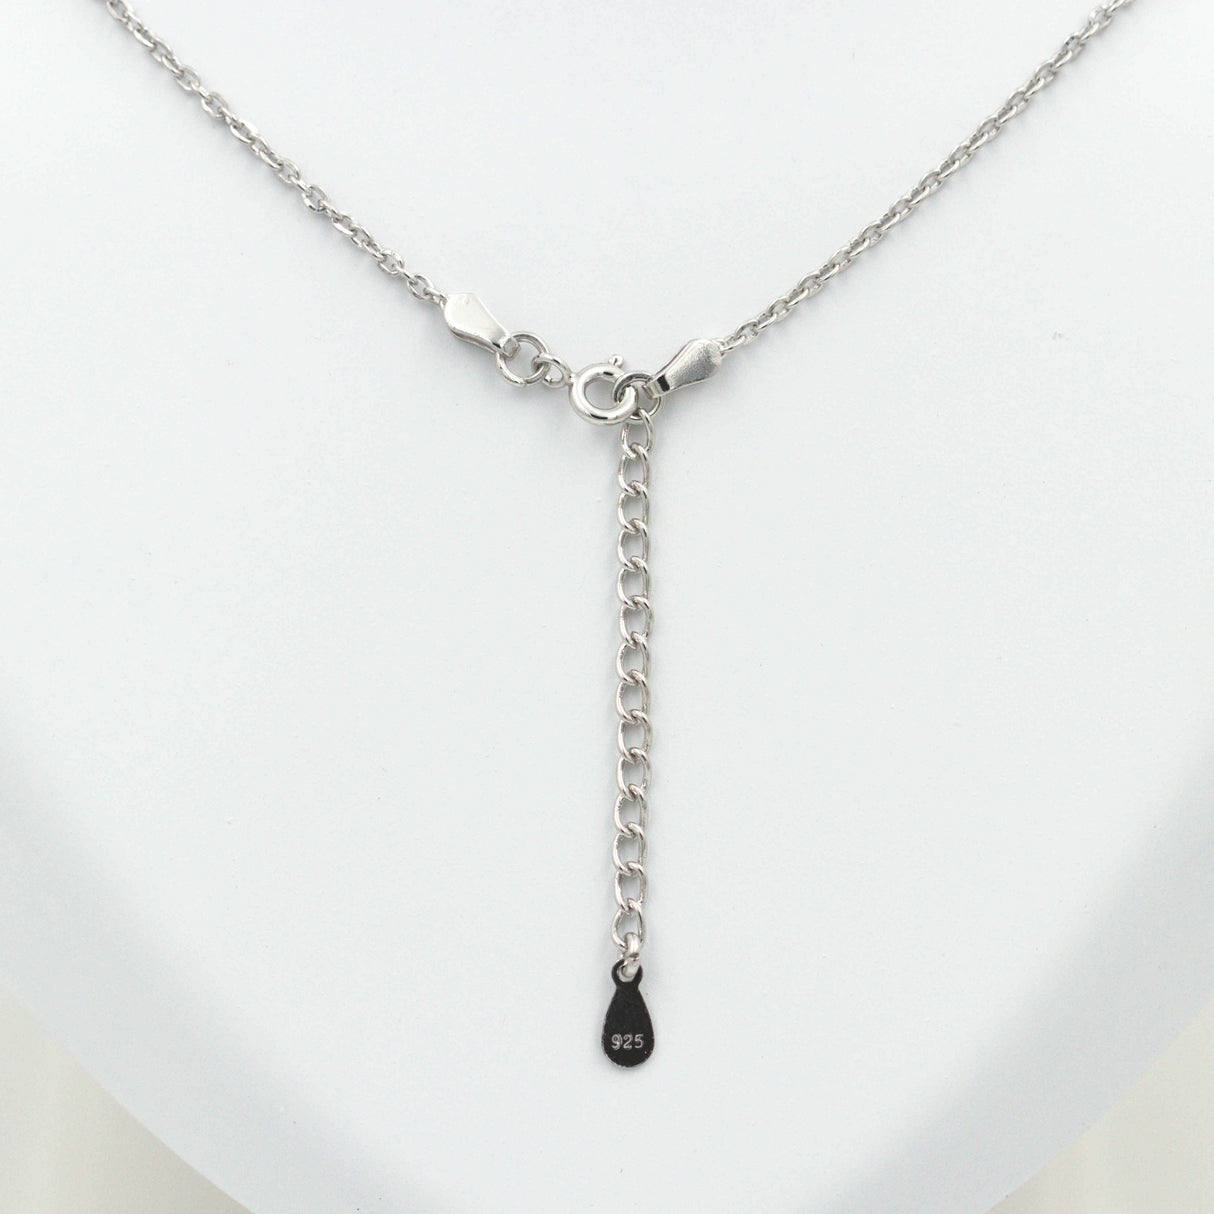 Silver Stick Pendant with Link Chain